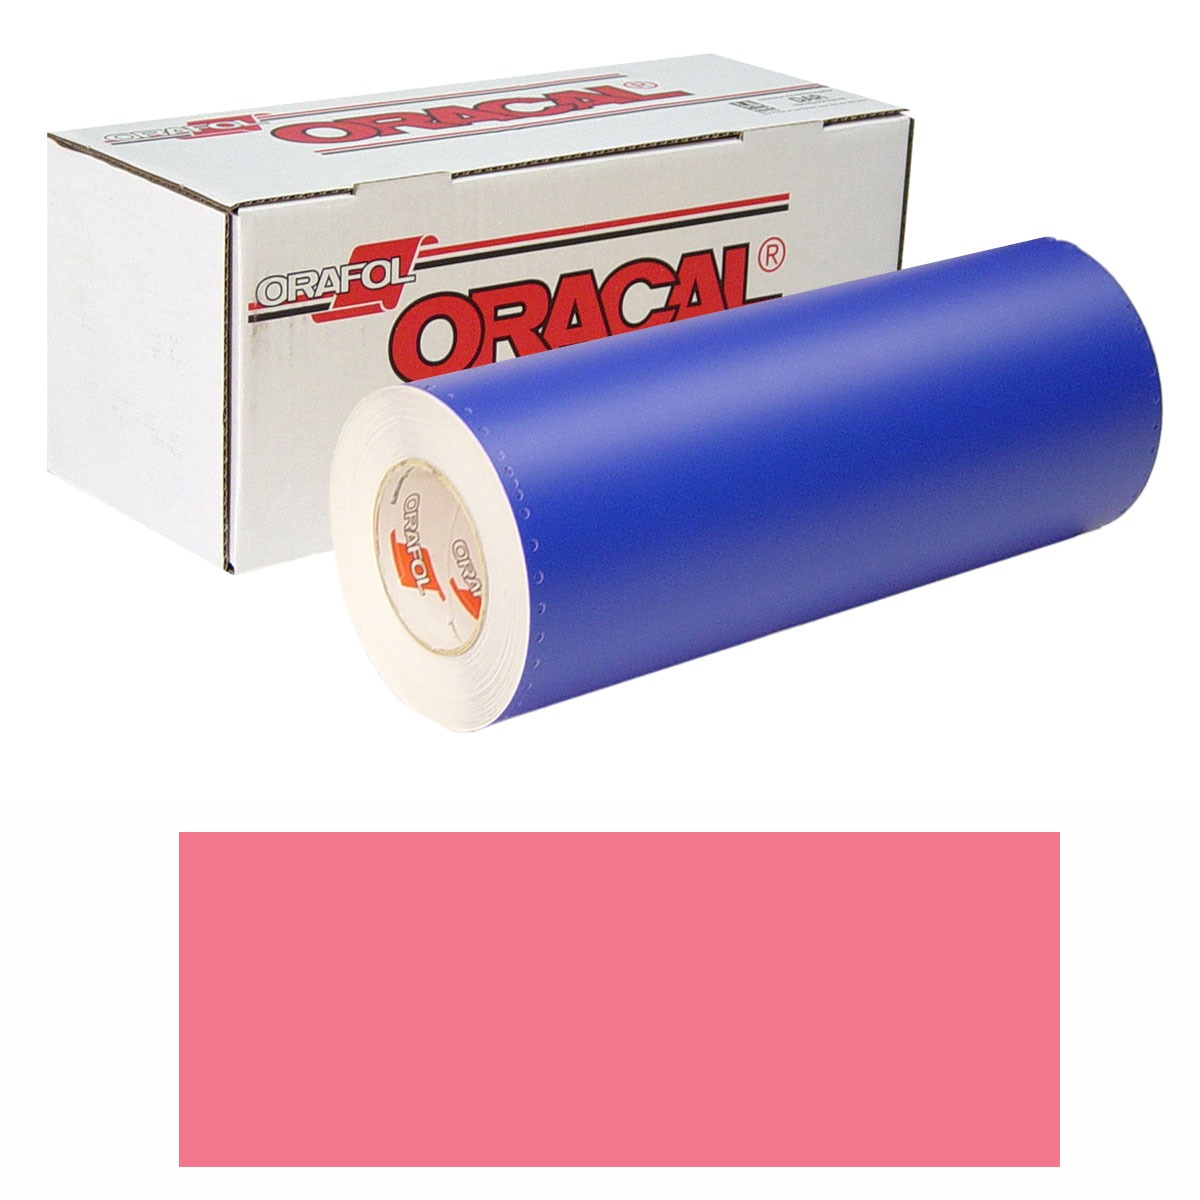 ORACAL 8300 15in X 10yd 032 Light Red